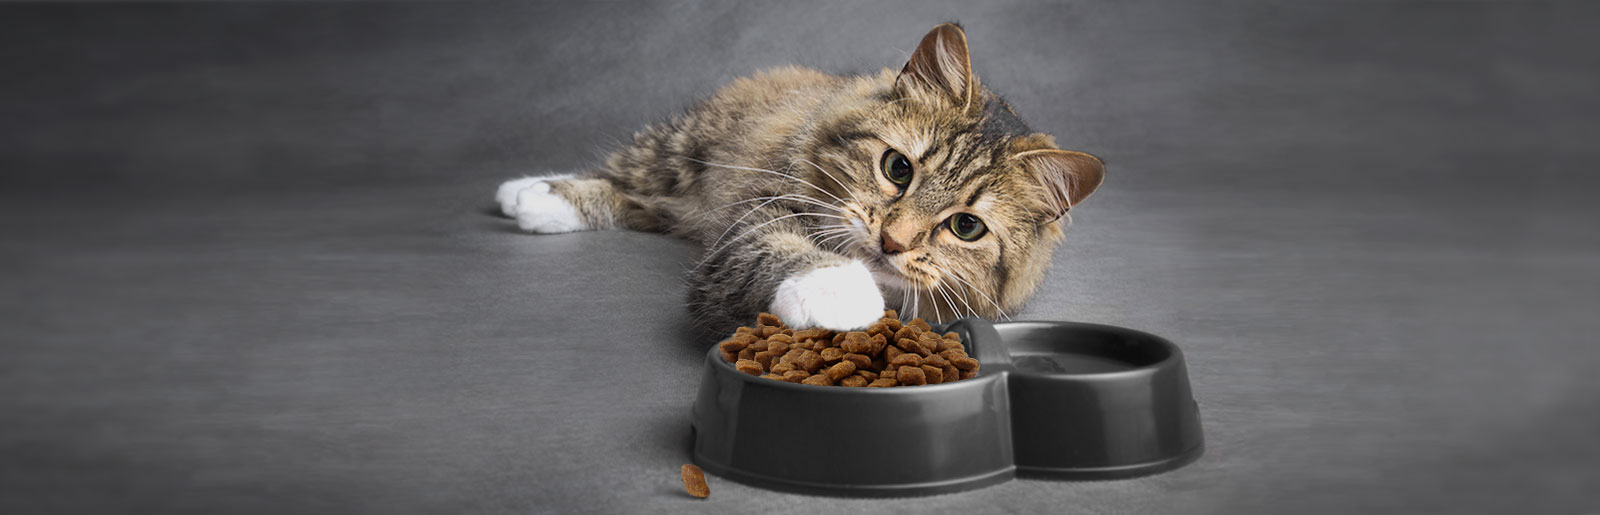 Changing the cat's food: Getting your cat used to the new cat food